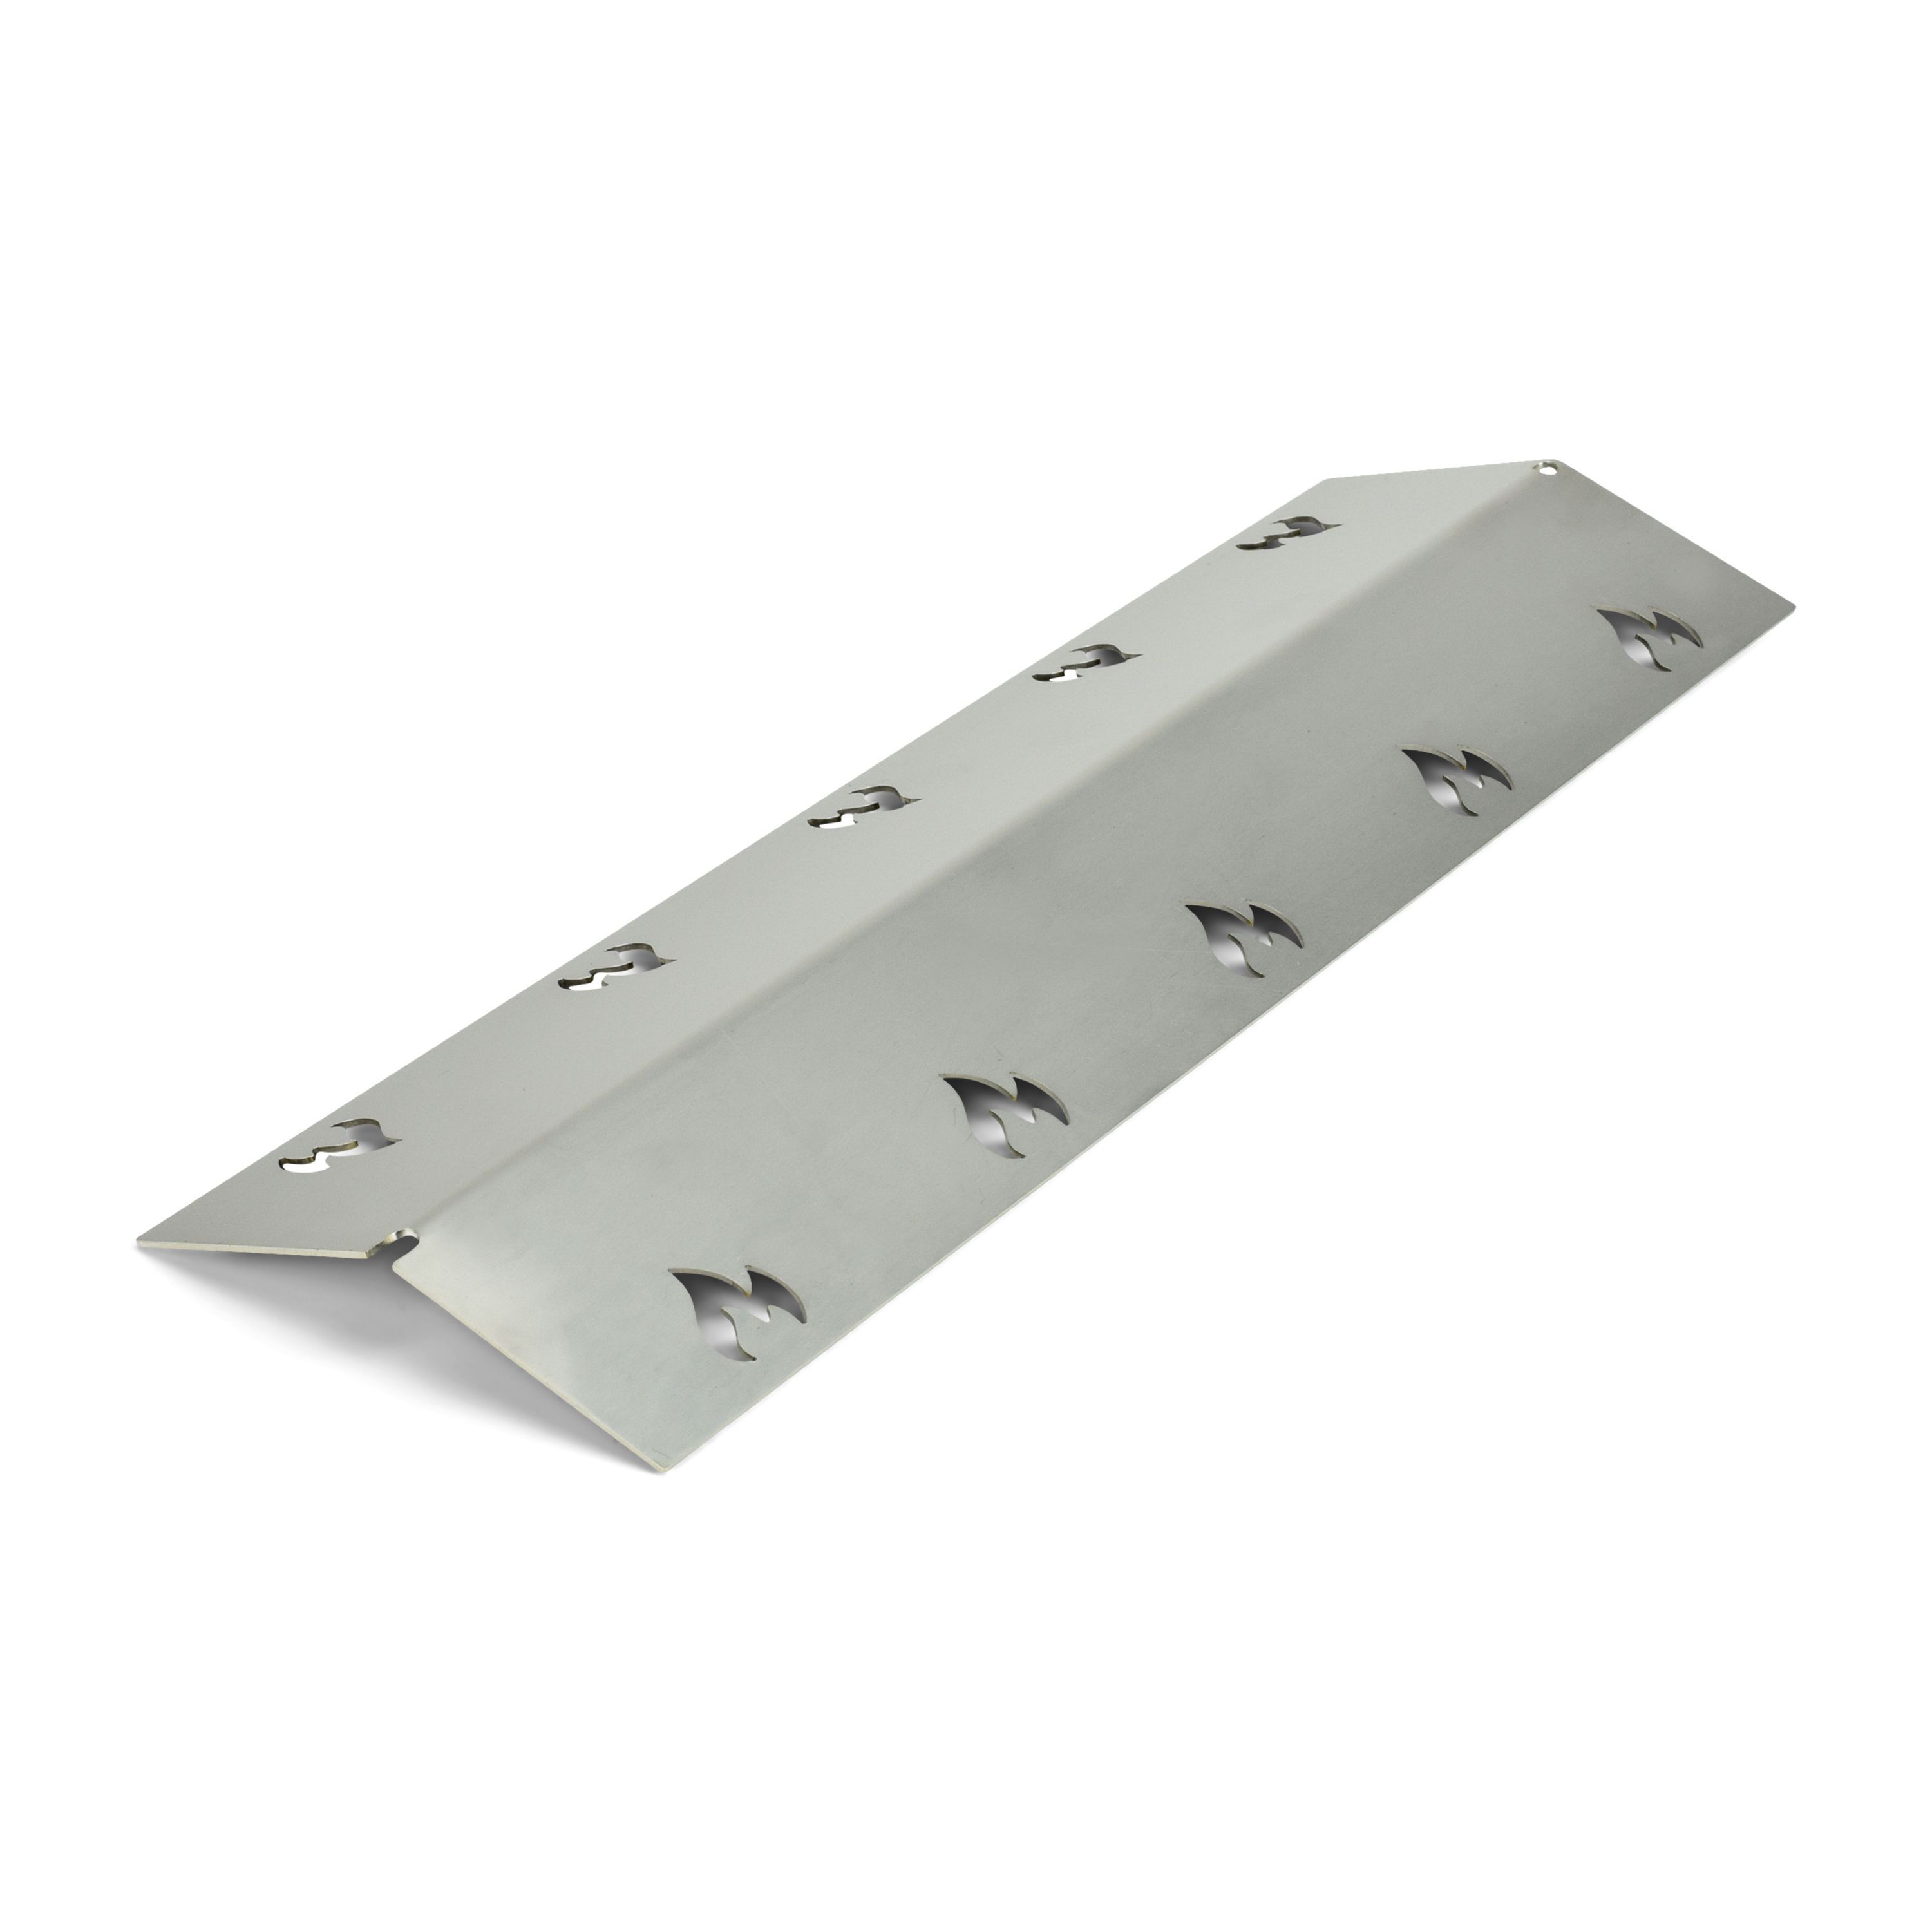 Stainless steel burner cover 37.5 x 12 cm Replacement aroma rail outlives your barbecue